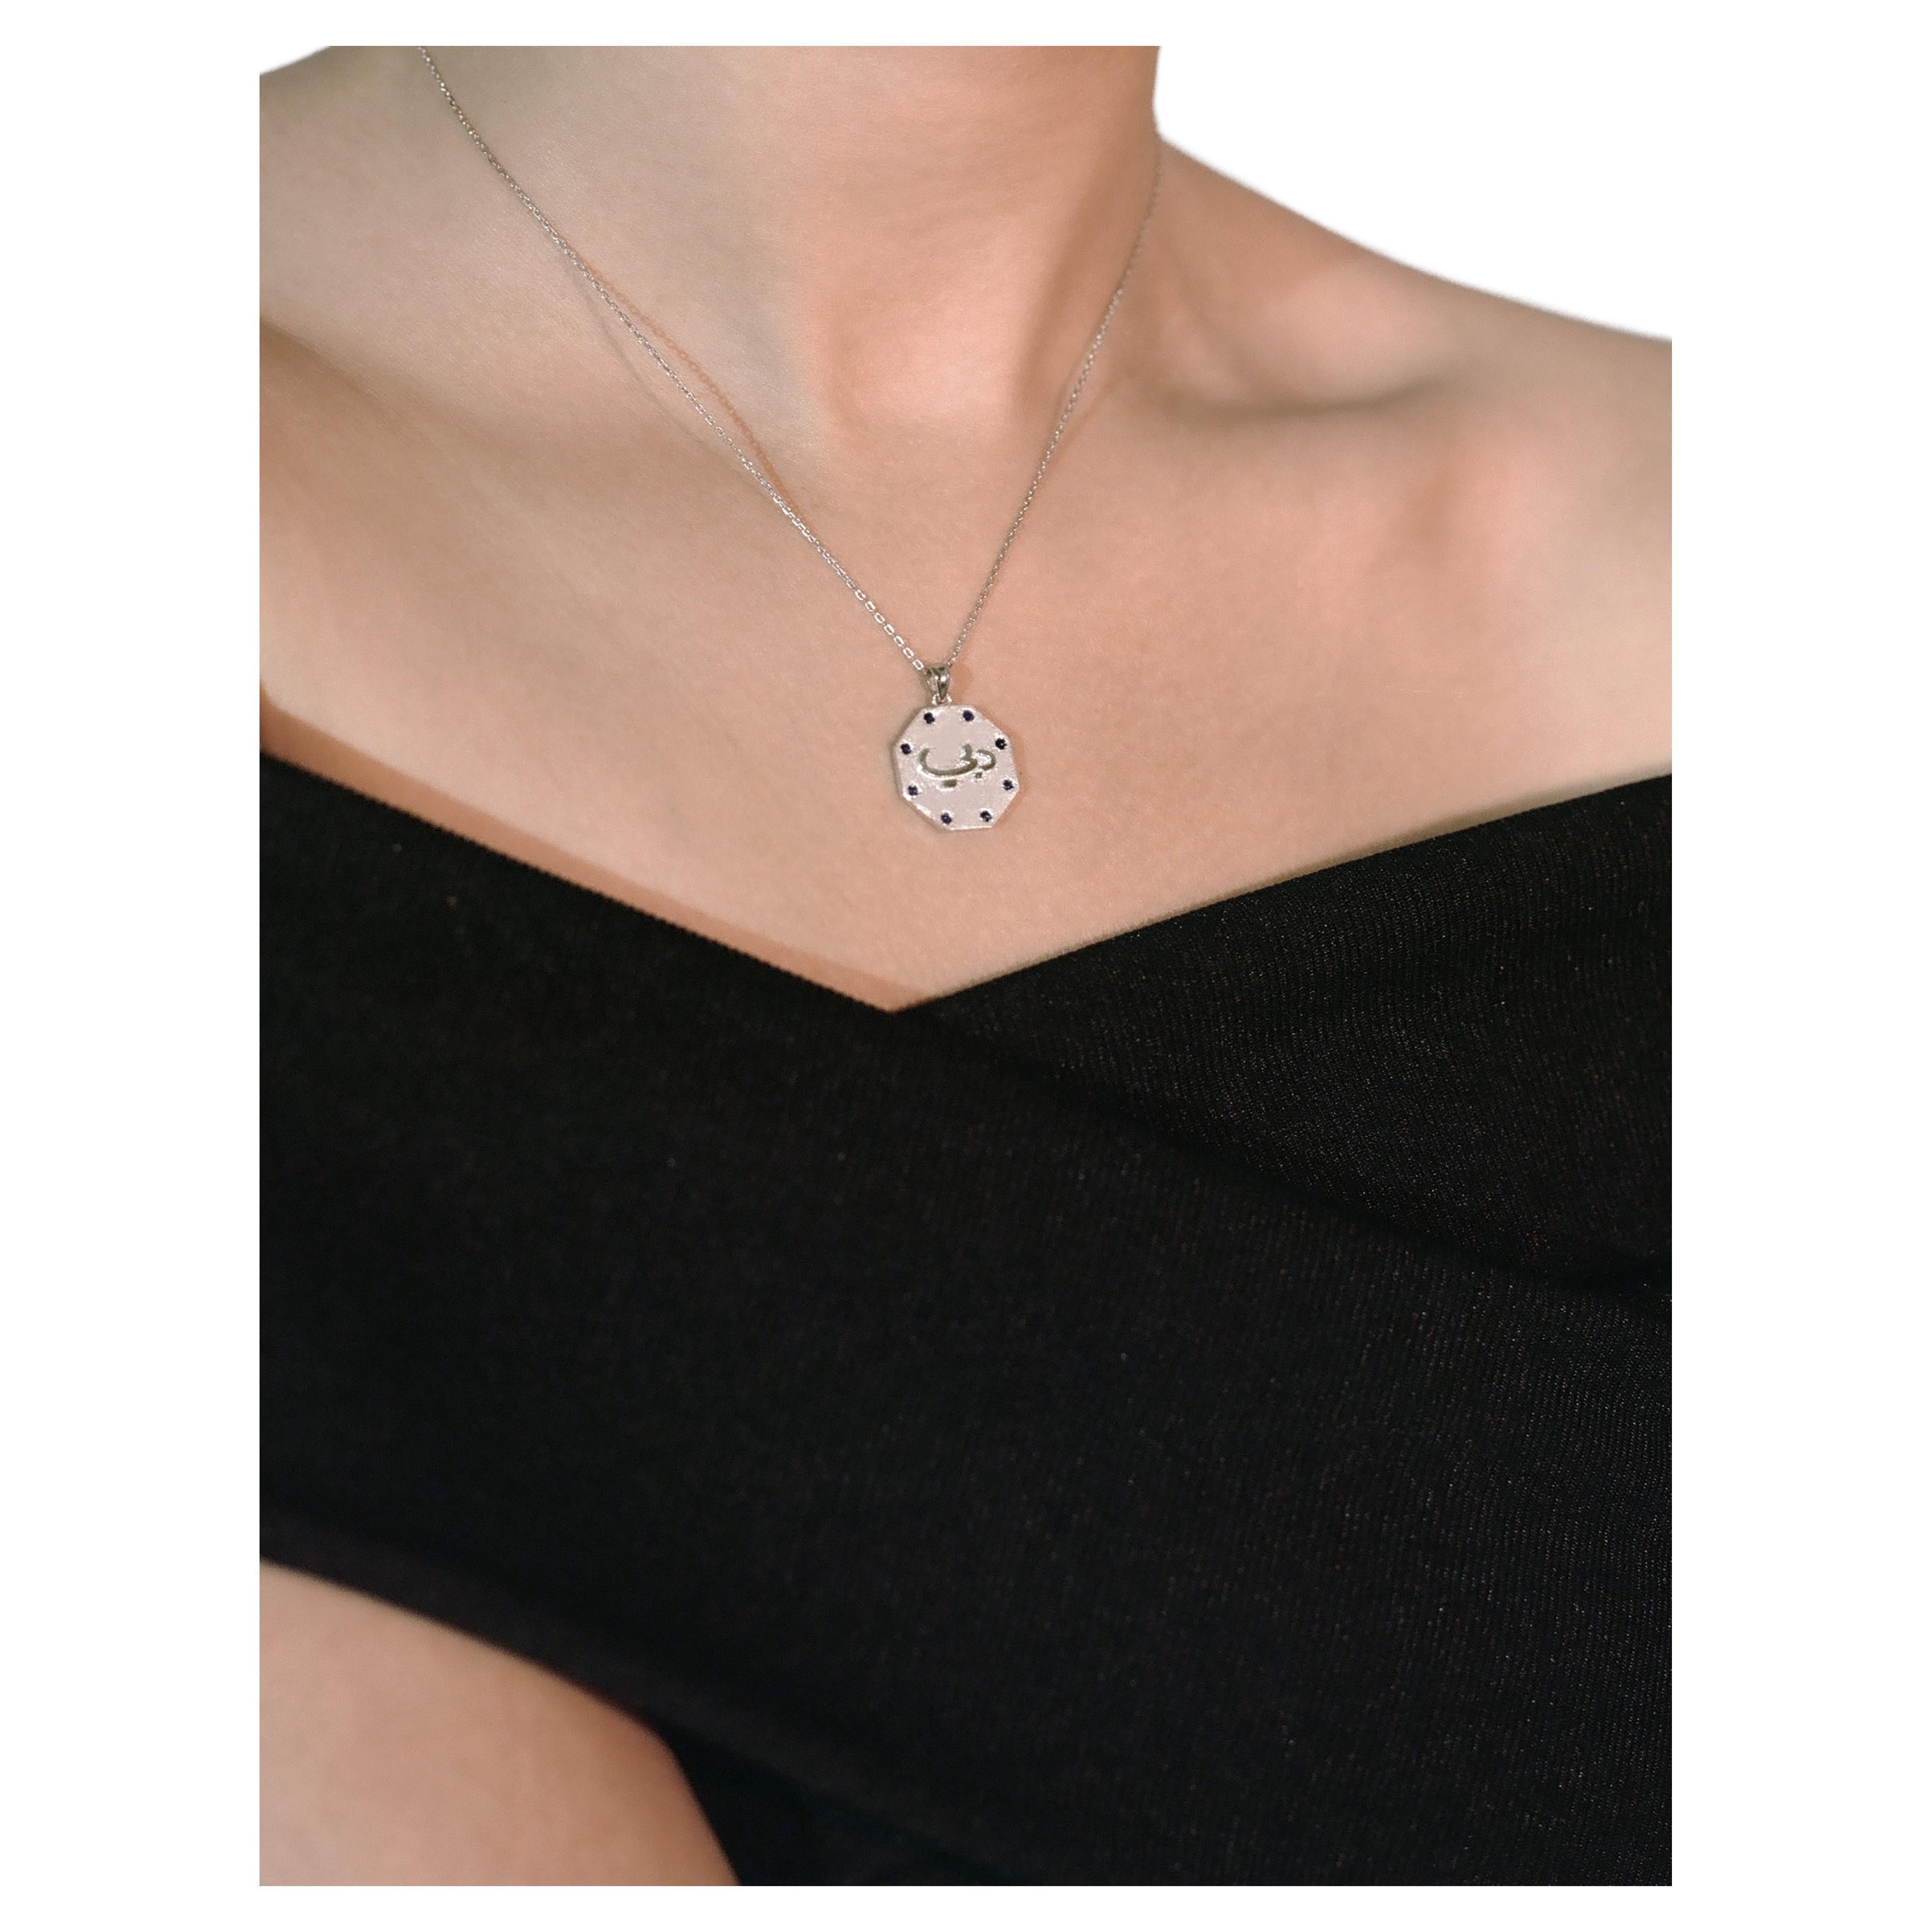 Octagon shaped white 18k Gold  adjustable chain Necklace. For Sale